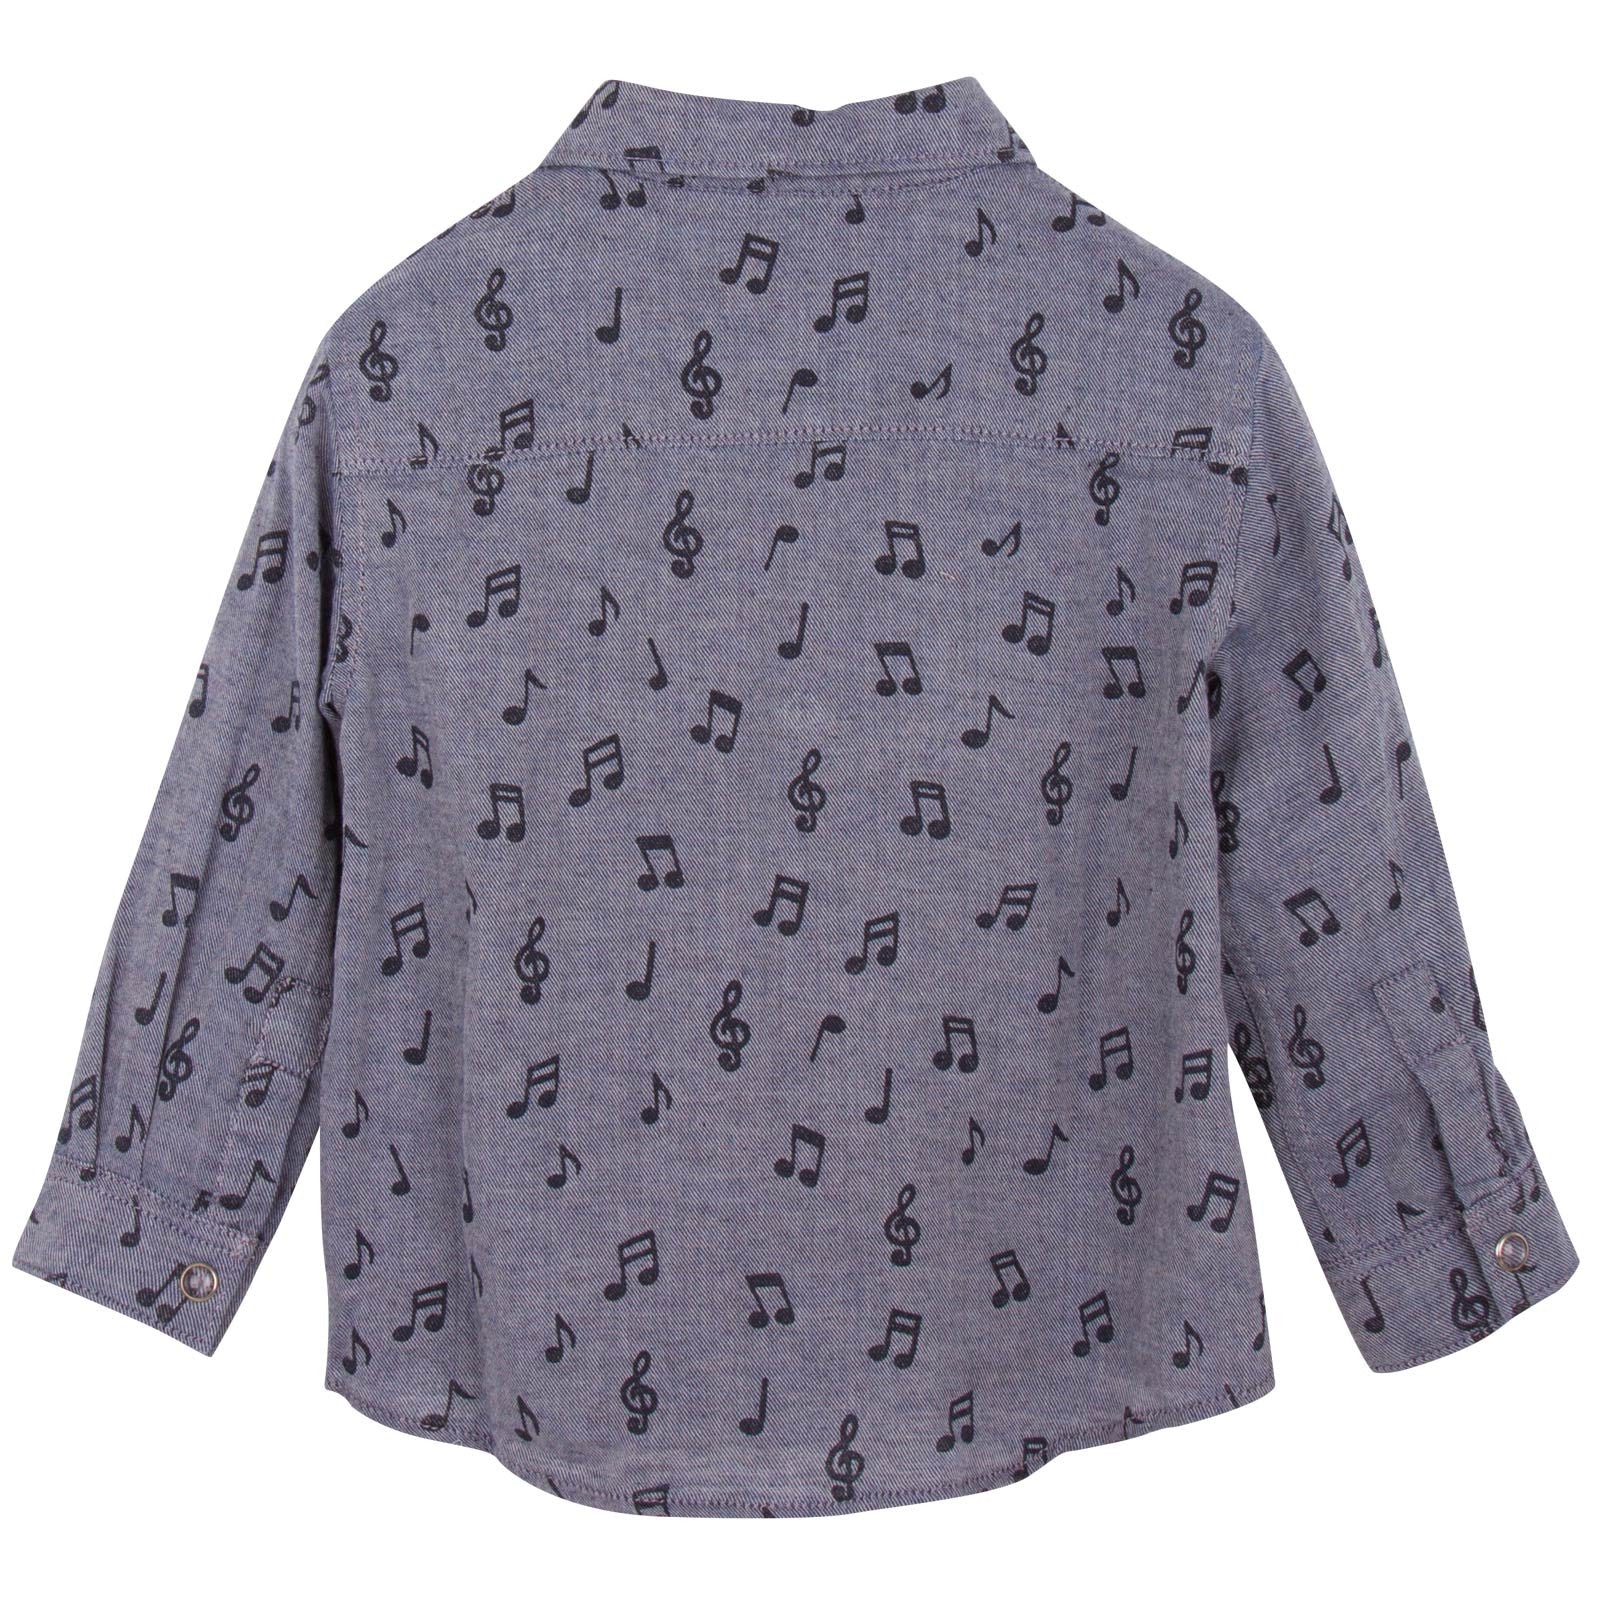 Baby Boys Navy Blue Musical Notes Chambray Printed Shirt - CÉMAROSE | Children's Fashion Store - 2